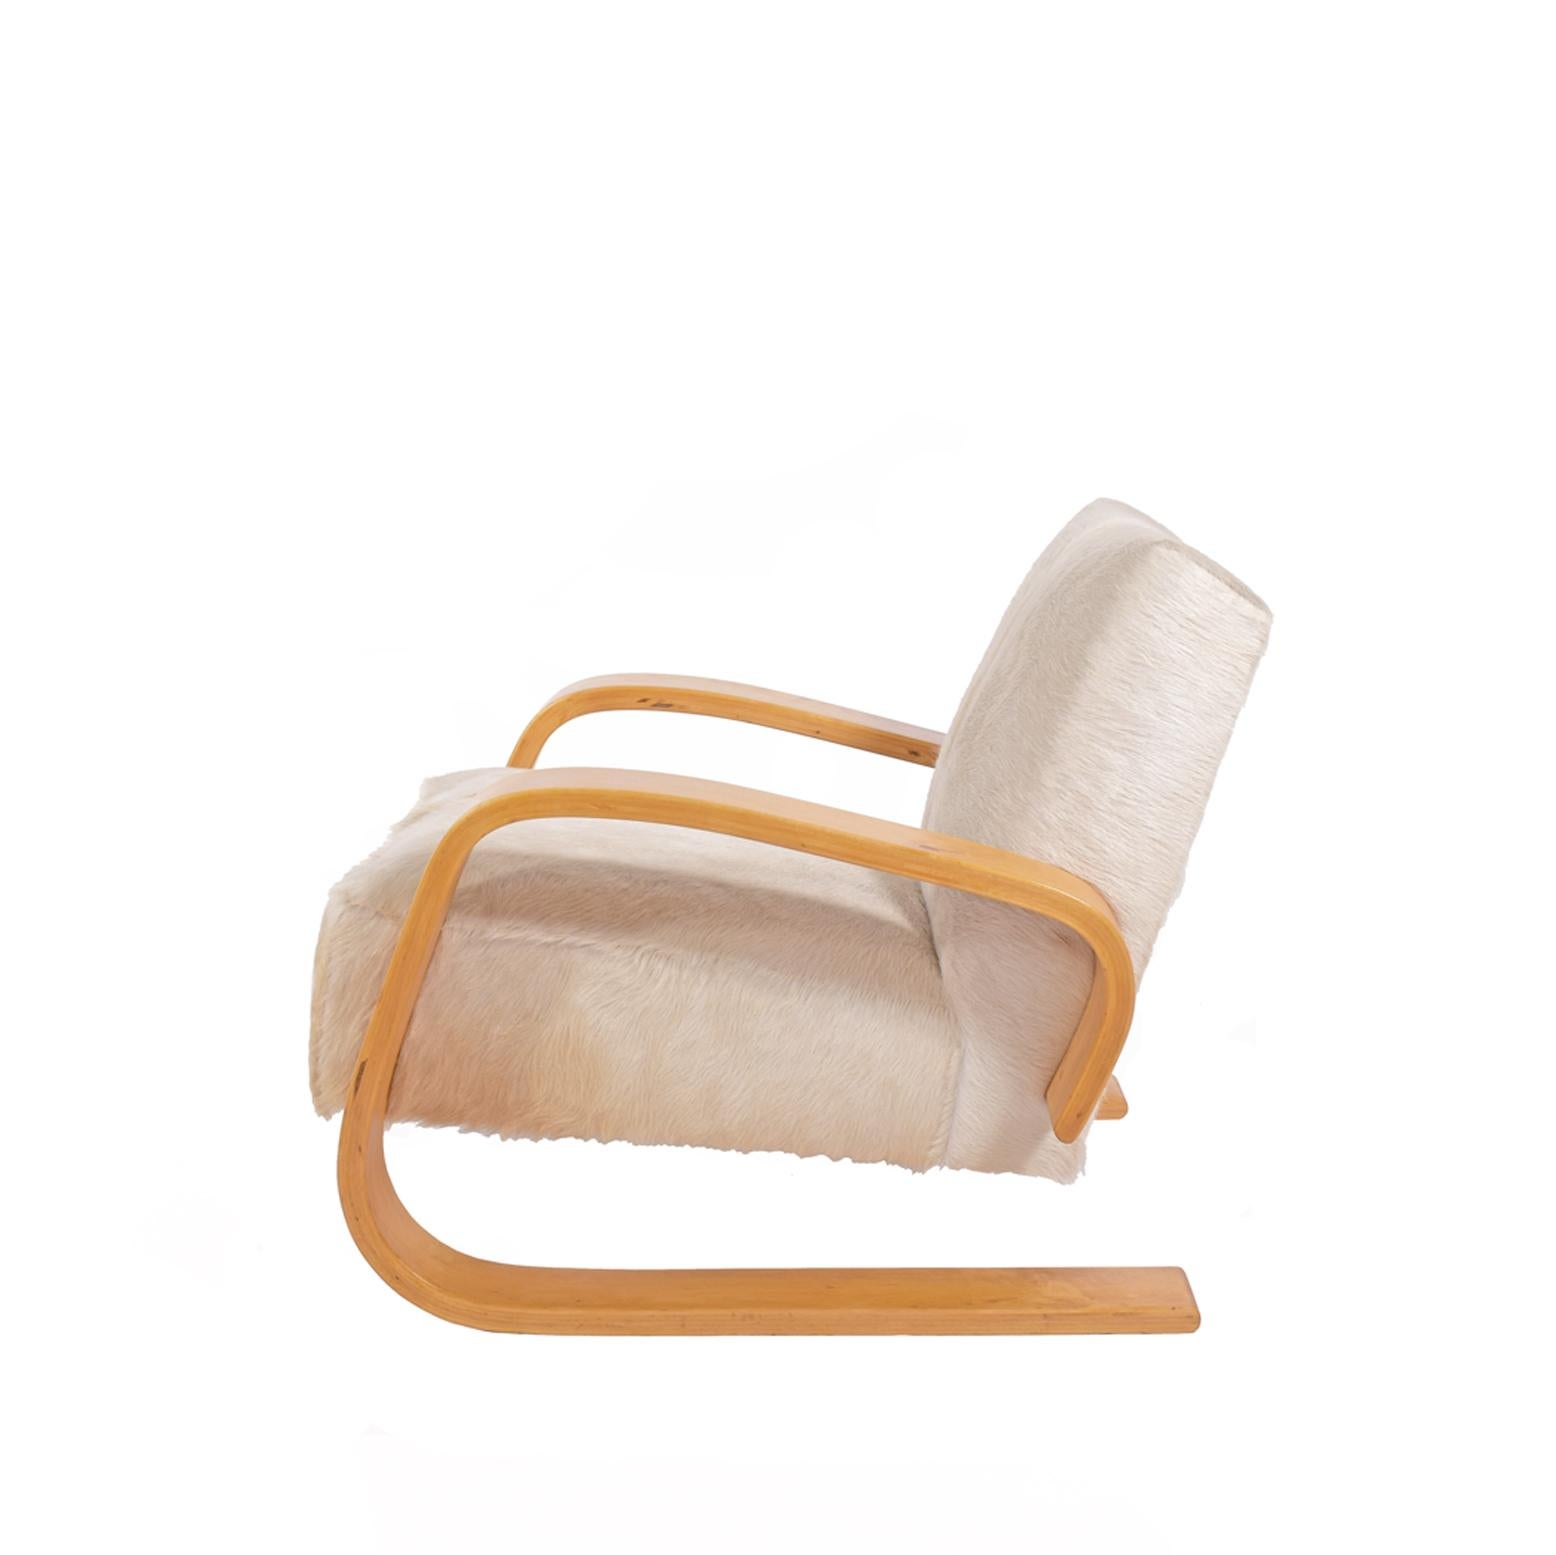 Early Tank chair with birch arms and spring construction seat and back. Reupholstered in cowhide. Made by Artek. This chair was produced between 1940 and 1955.